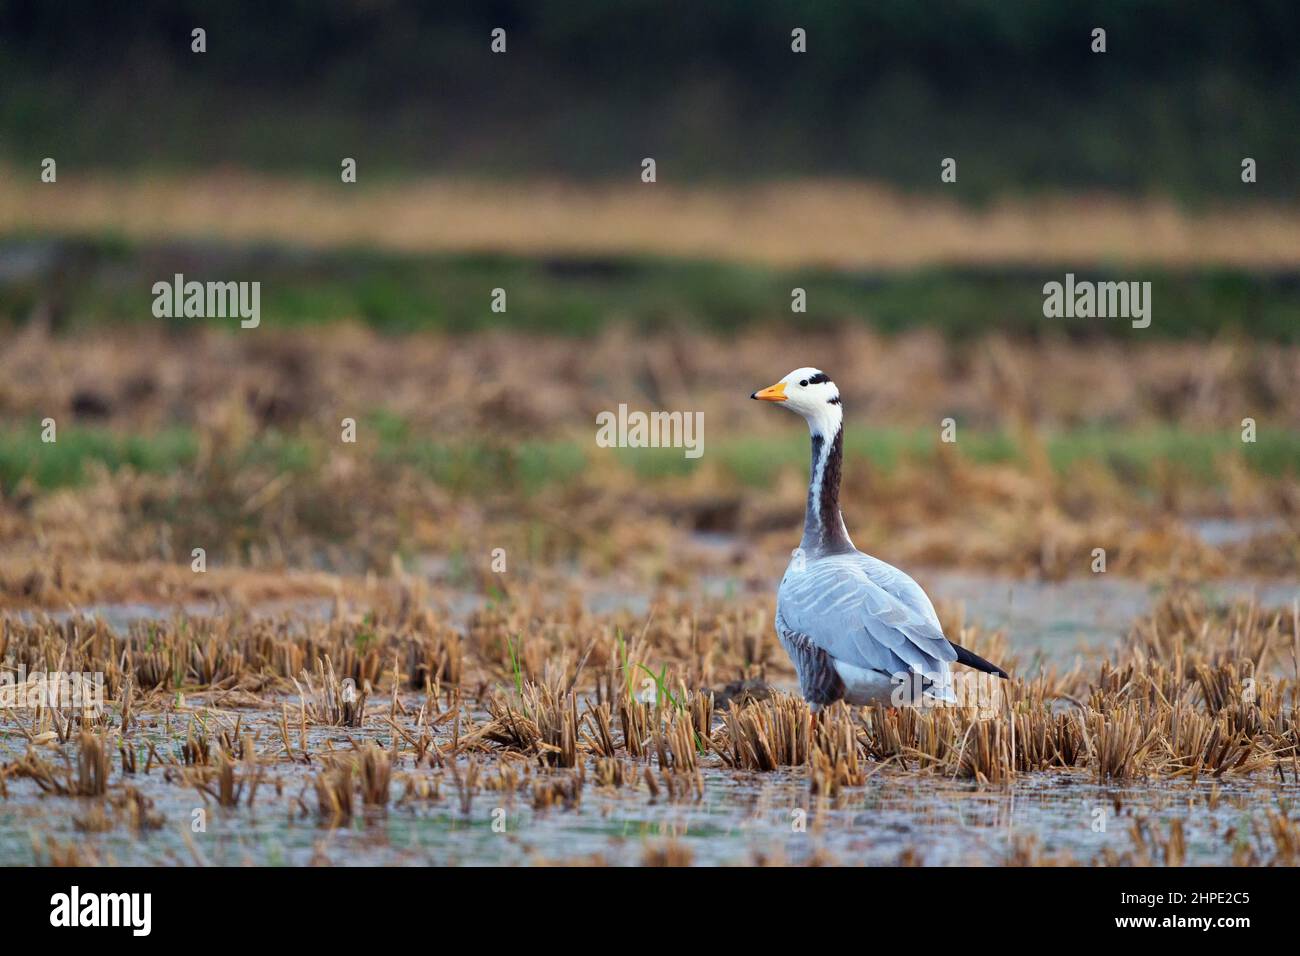 Bar Headed goose in their natural habitat. The grey colored bird is know for the extreme altitudes it reaches when migrating across the Himalayas Stock Photo